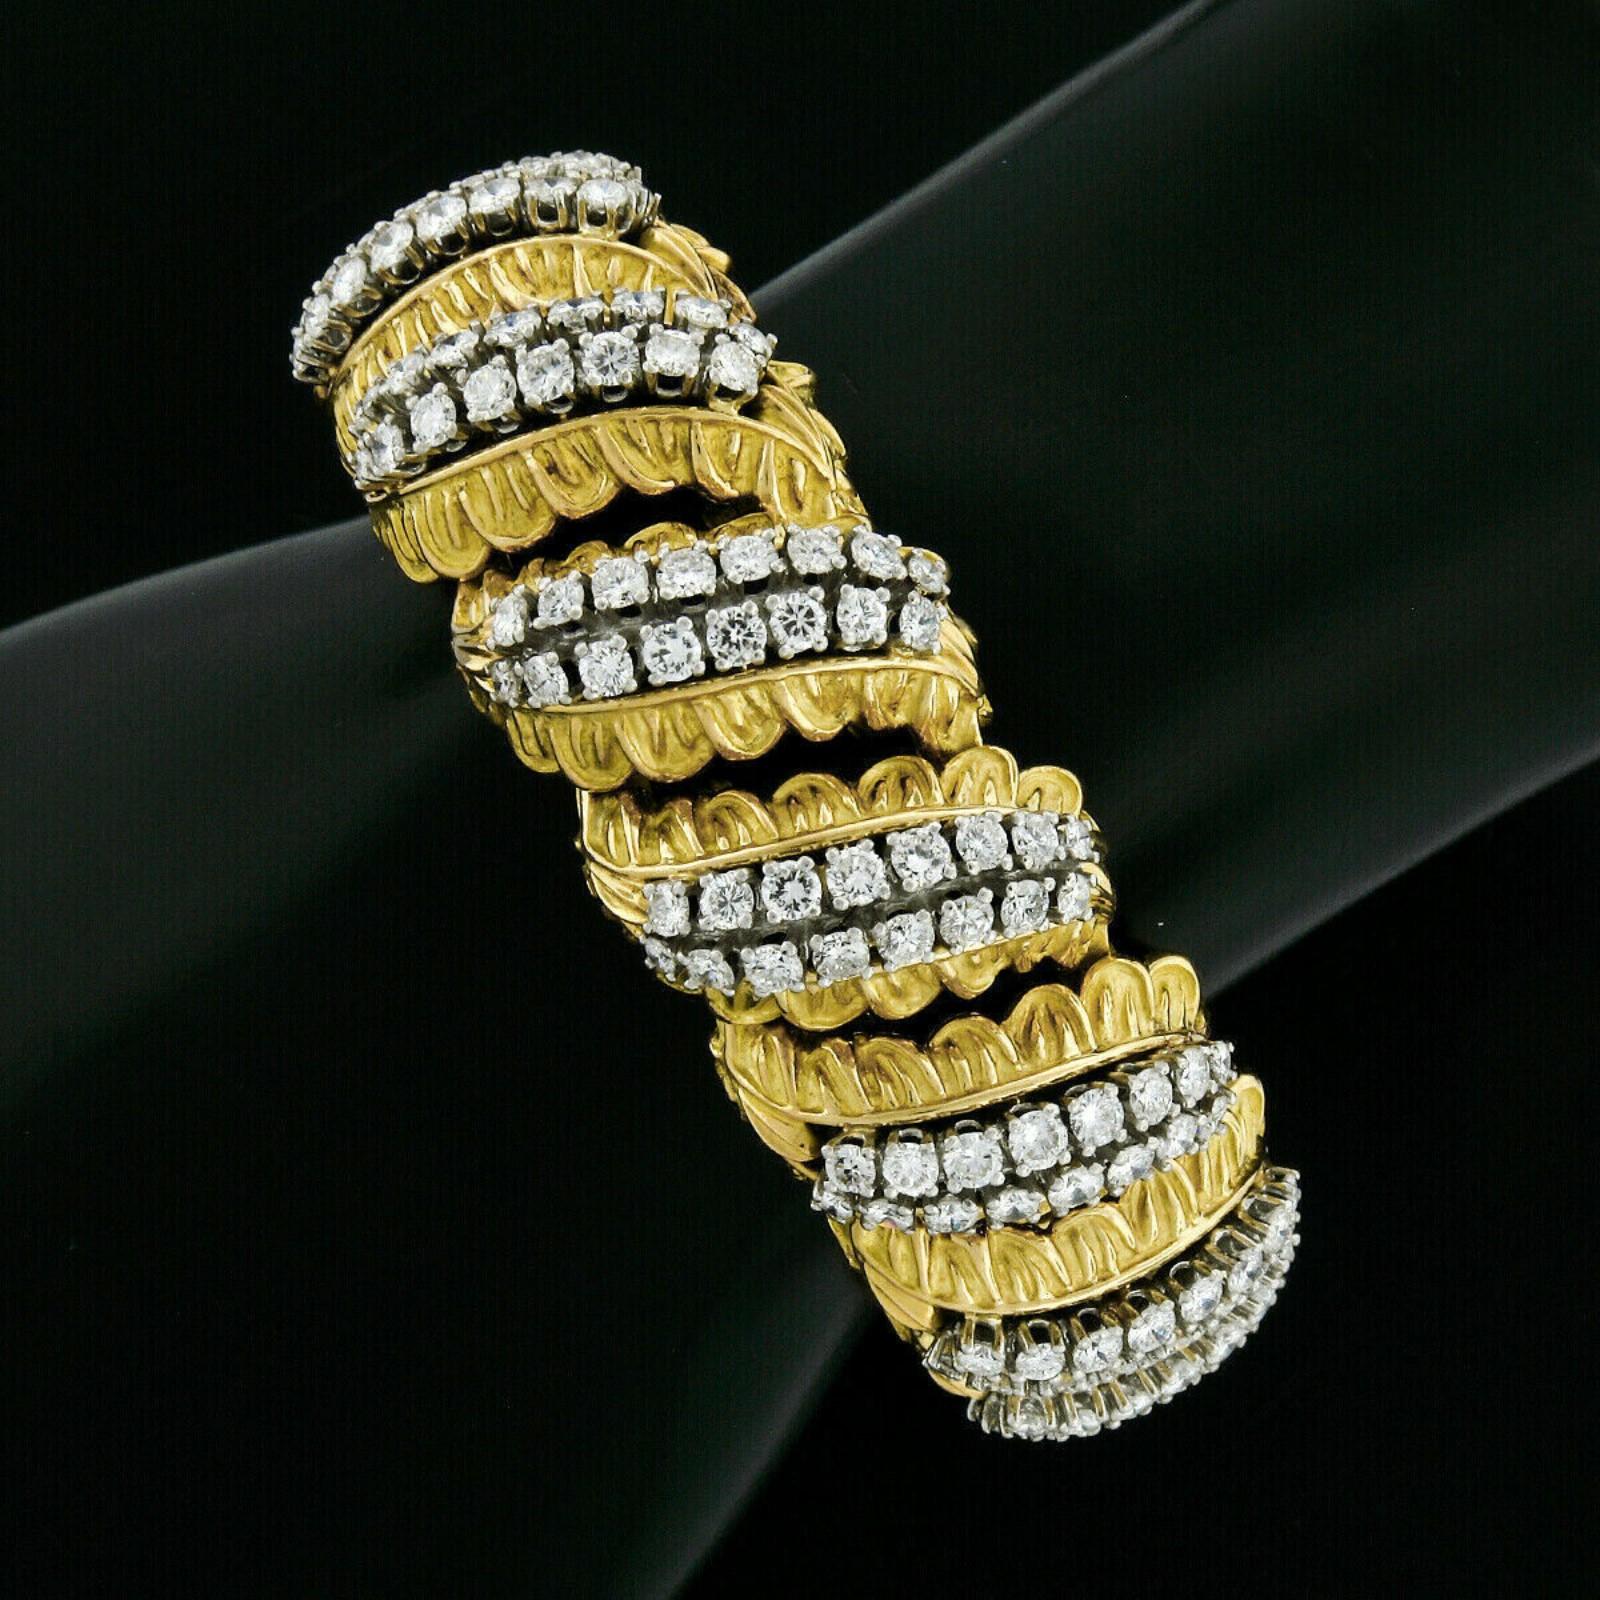 This very fine, vintage, cocktail statement piece was crafted from solid 18k gold and platinum. The bracelet is constructed from 18k gold, textured leaf links, topped by a twin row of solid platinum settings set with the finest quality diamonds